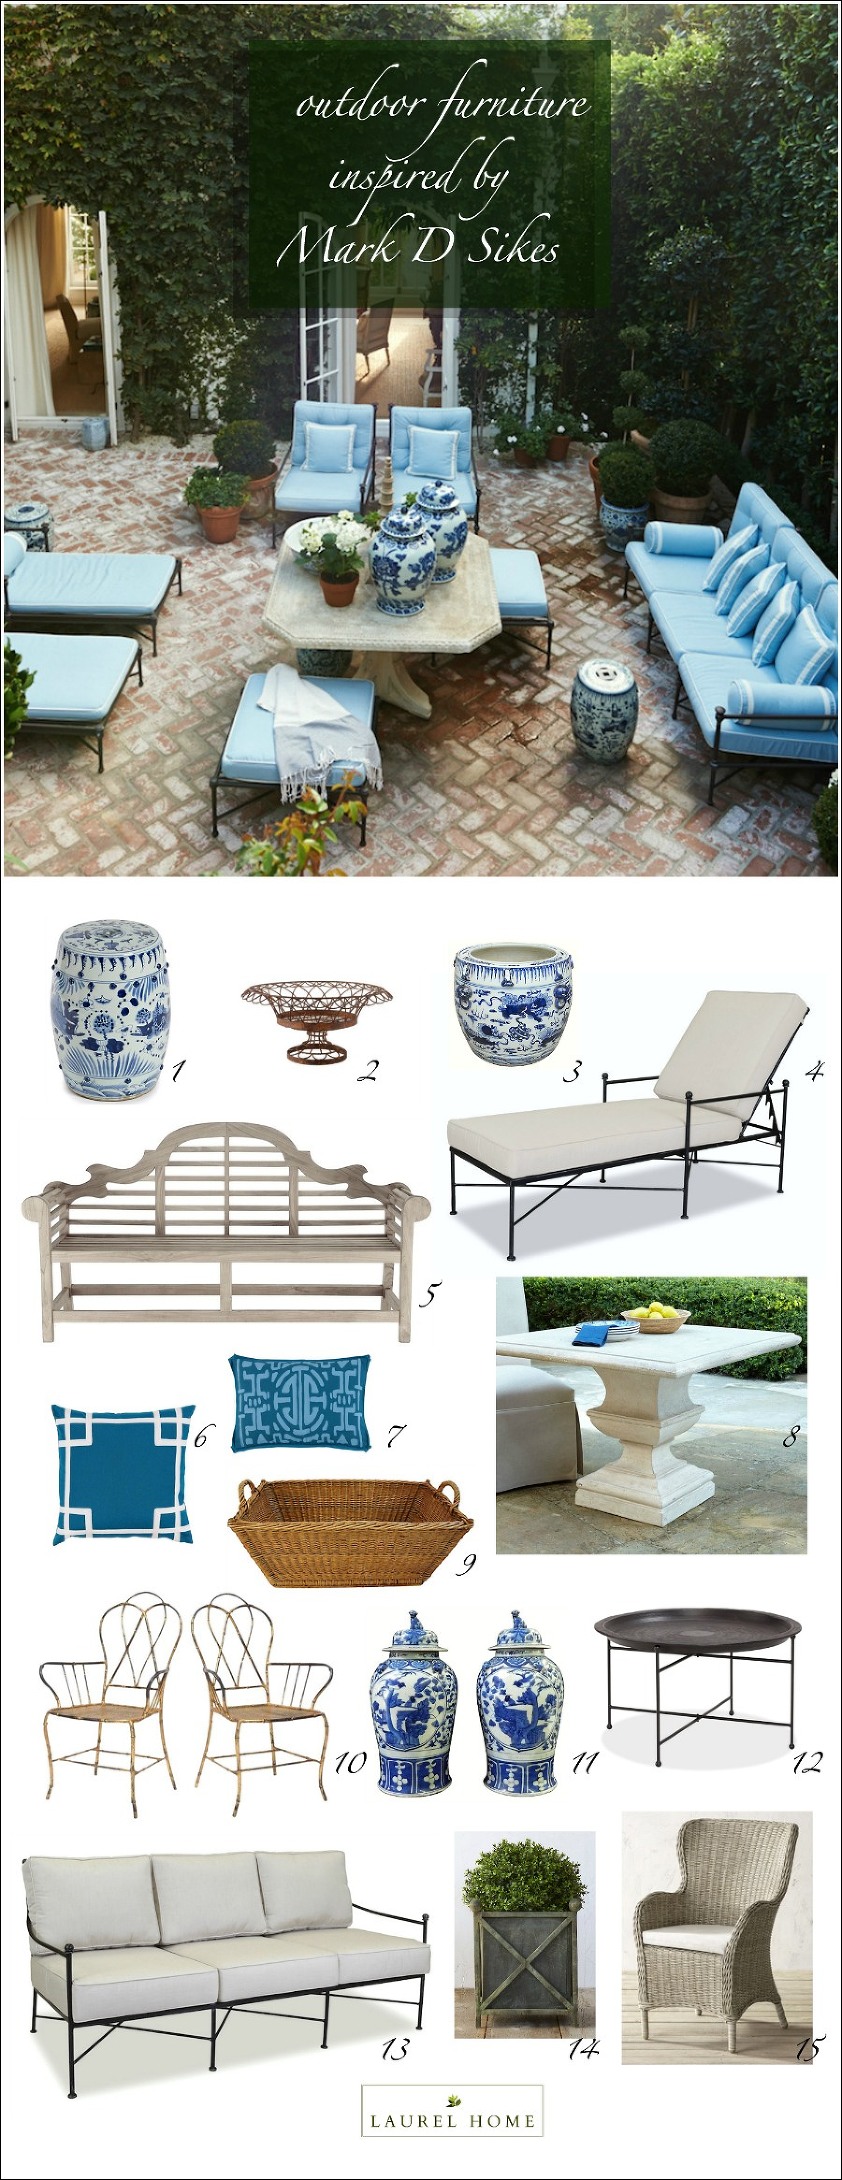 outdoor furniture inspired by Mark D Sikes